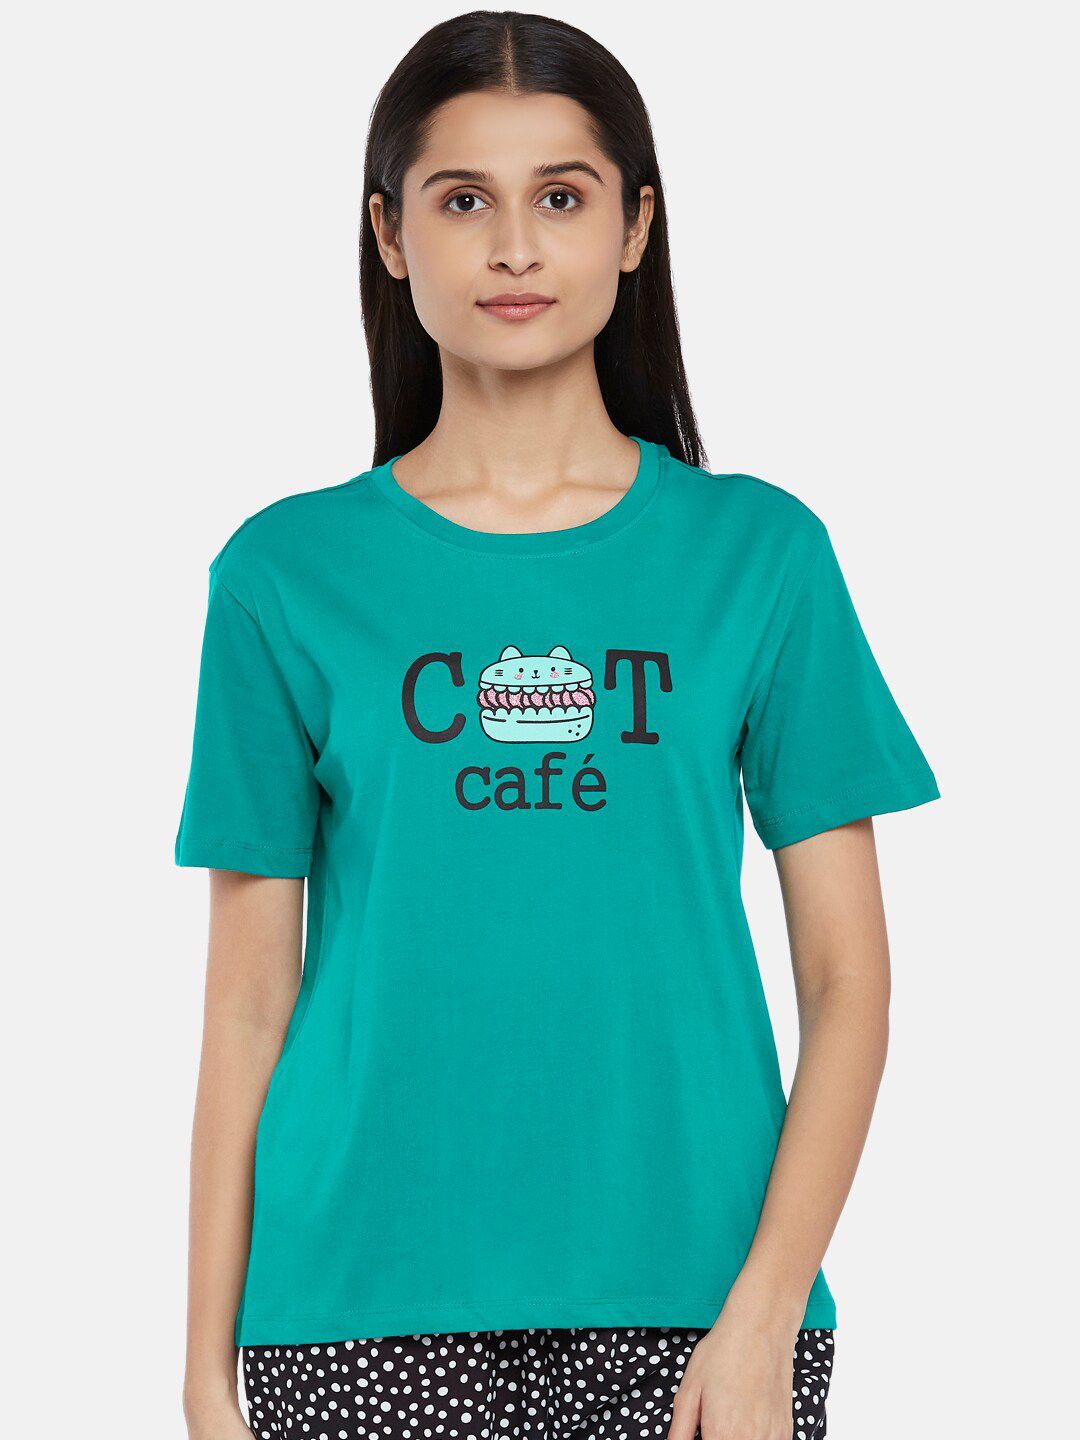 Dreamz by Pantaloons Woman Teal Green Print Cotton Lounge tshirt Price in India